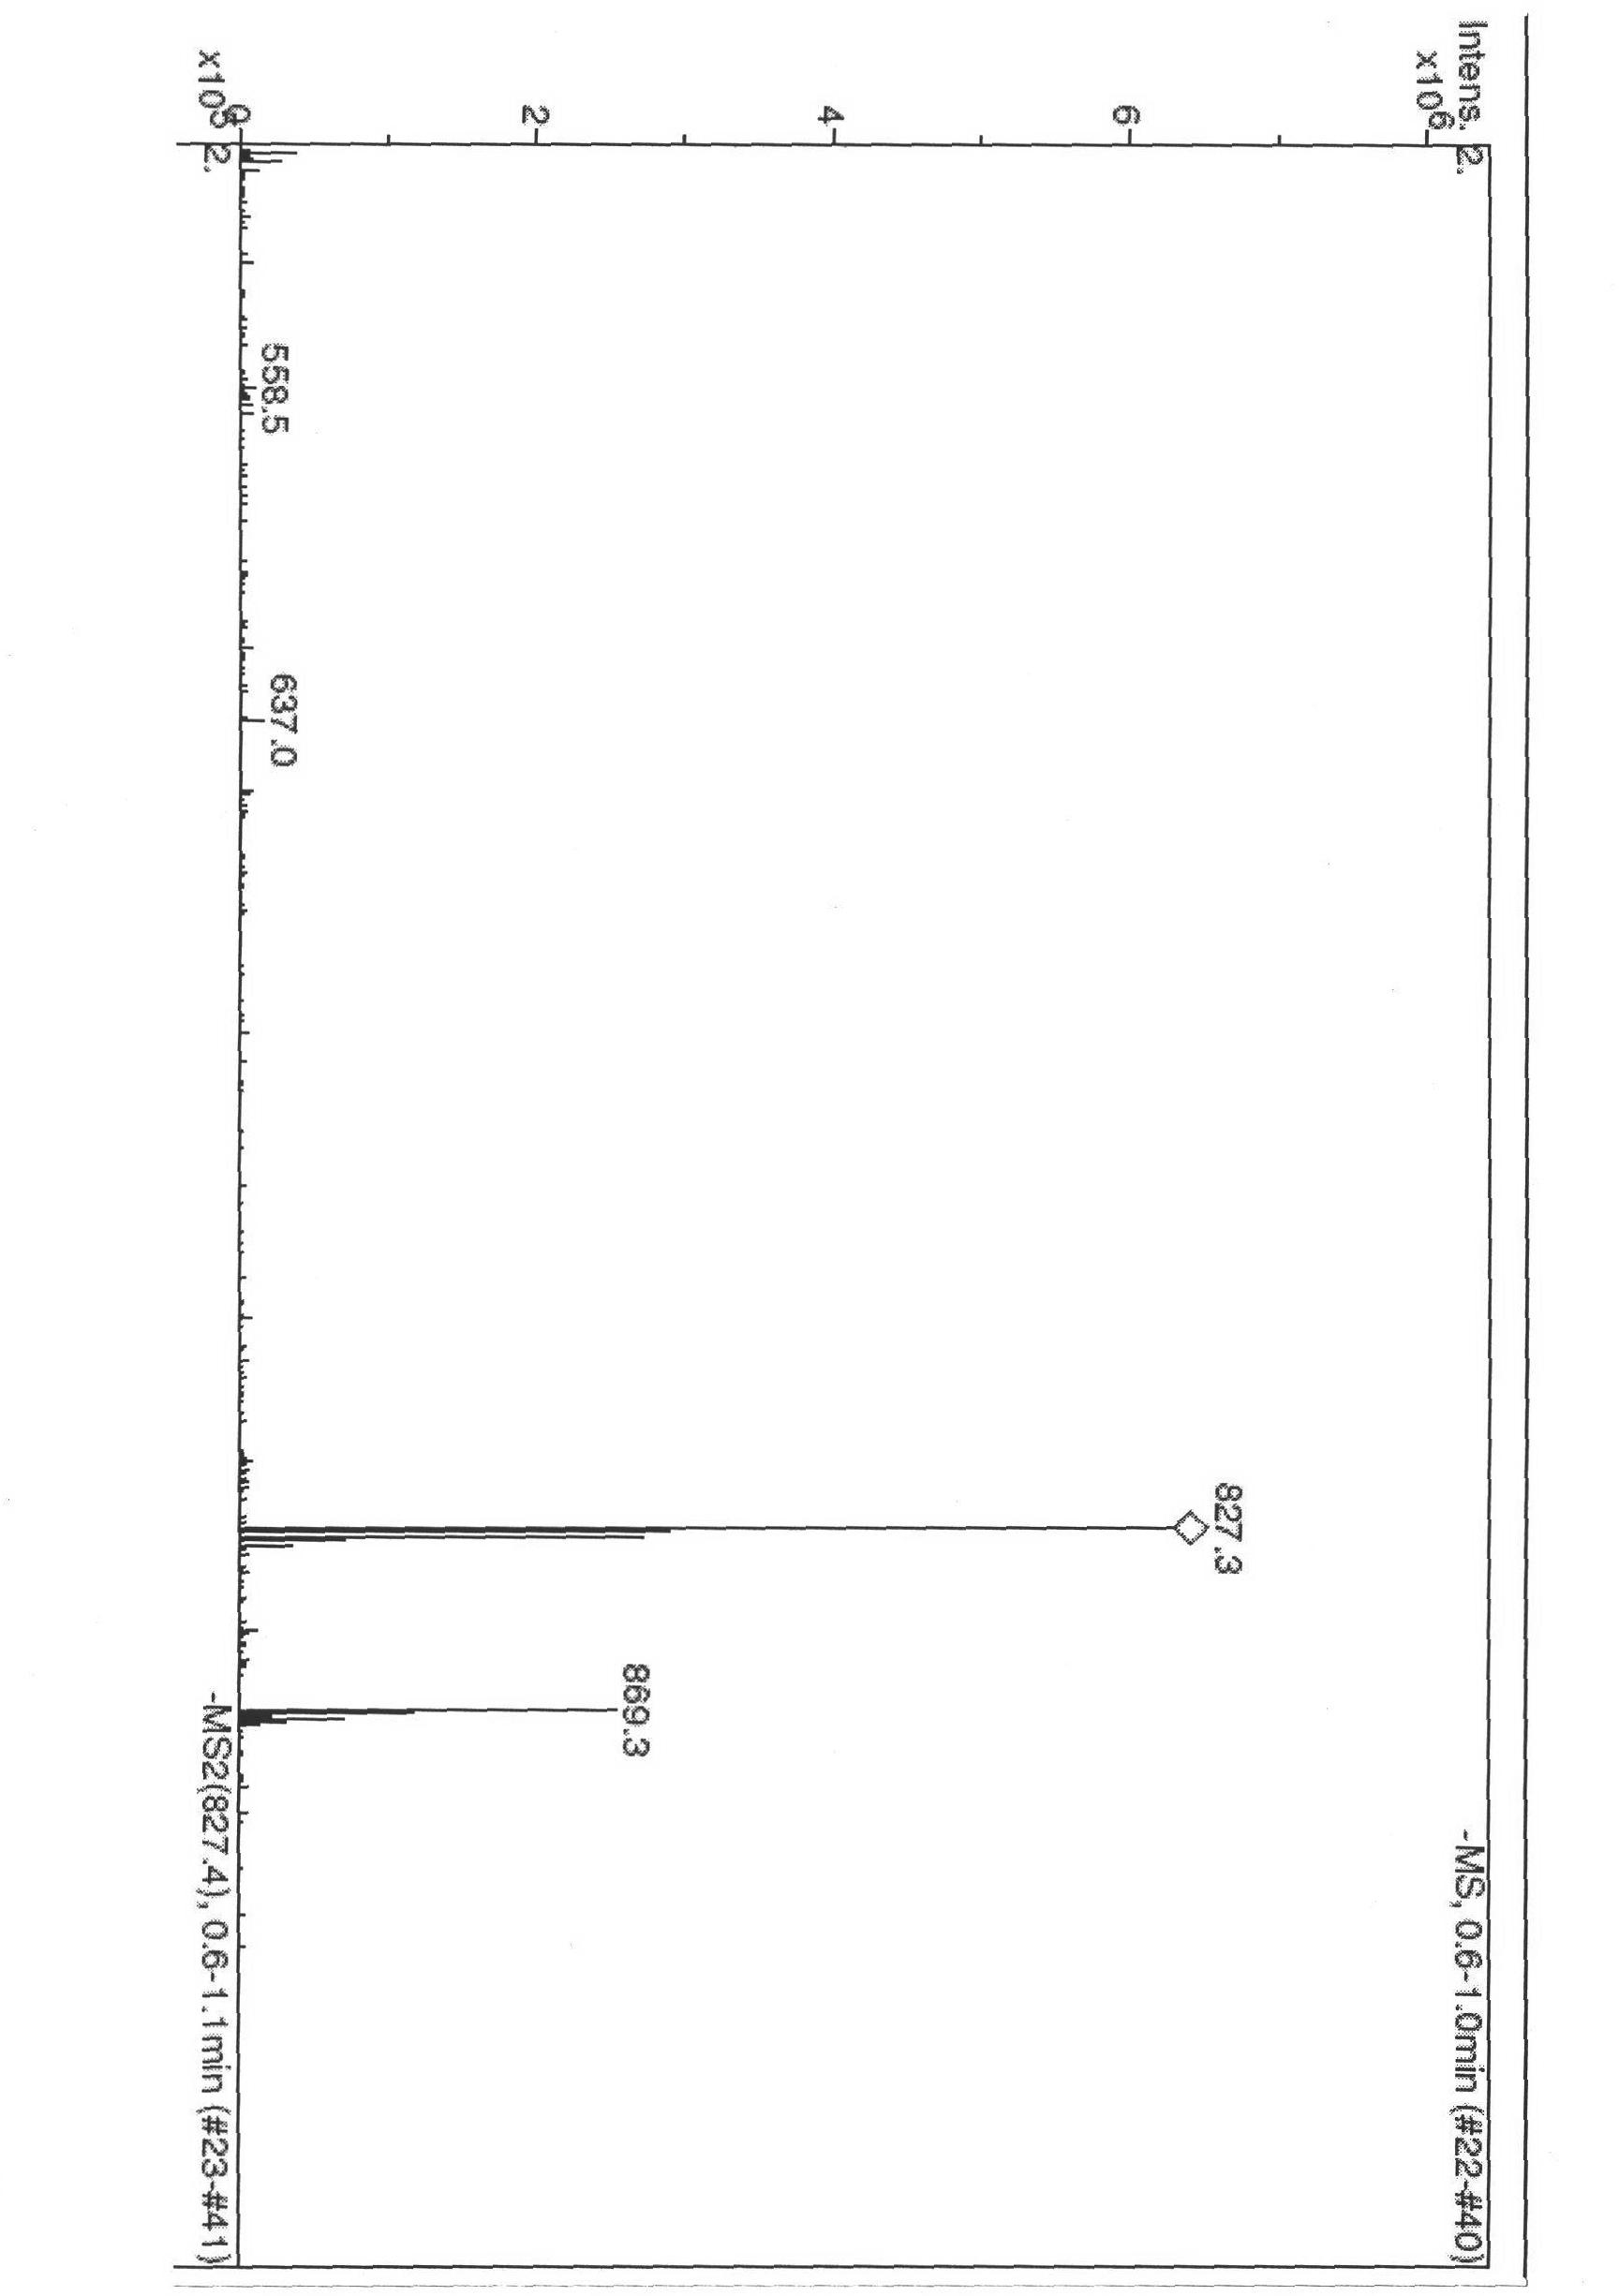 Novel notriterpenoid saponin compound and preparation method and application thereof